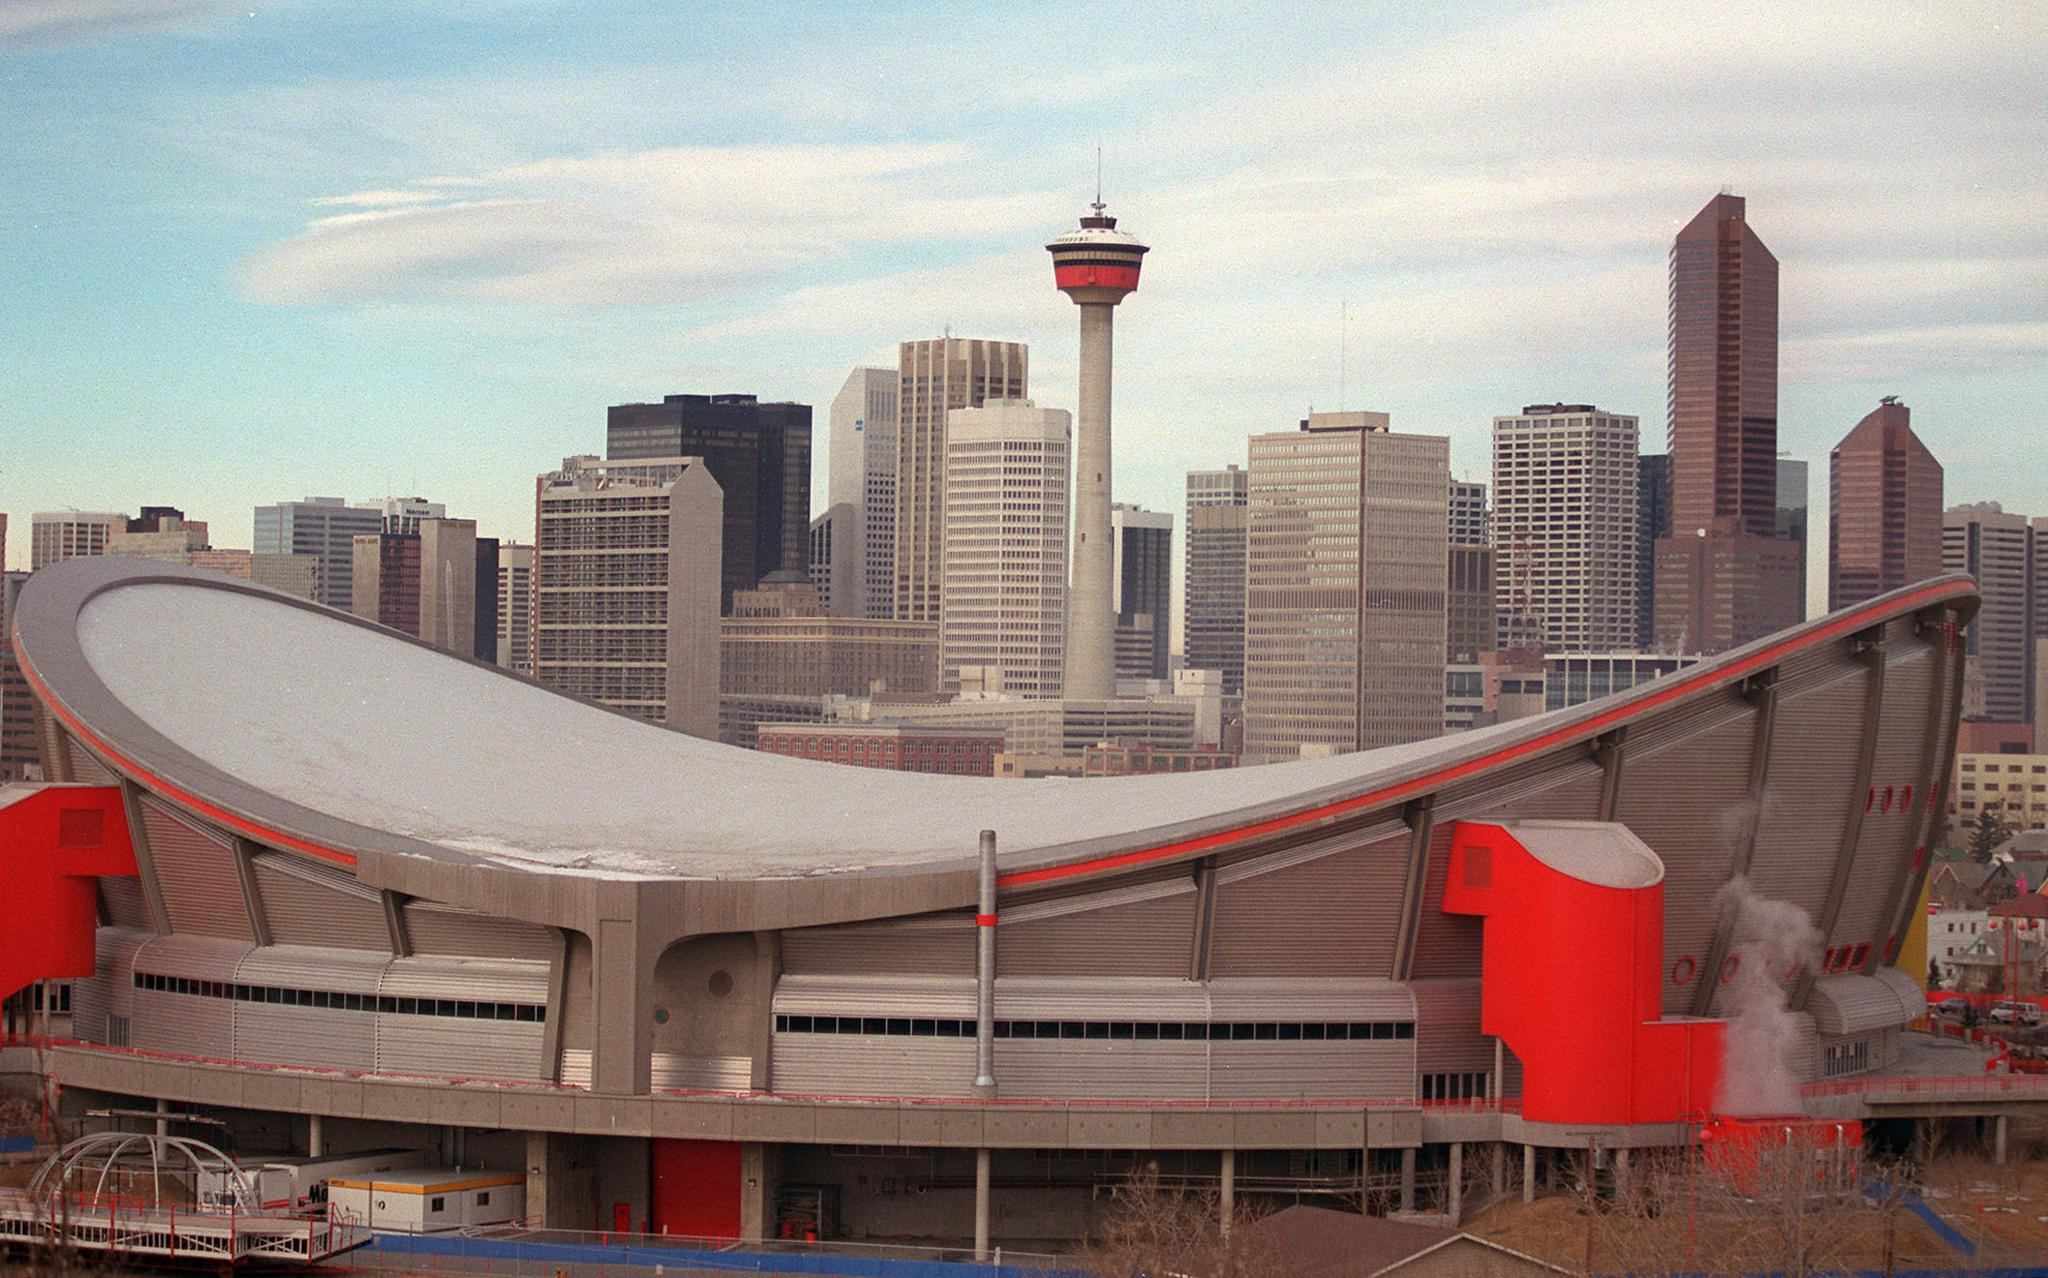 Calgary last hosted the Winter Olympic Games in 1988 ©Getty Images